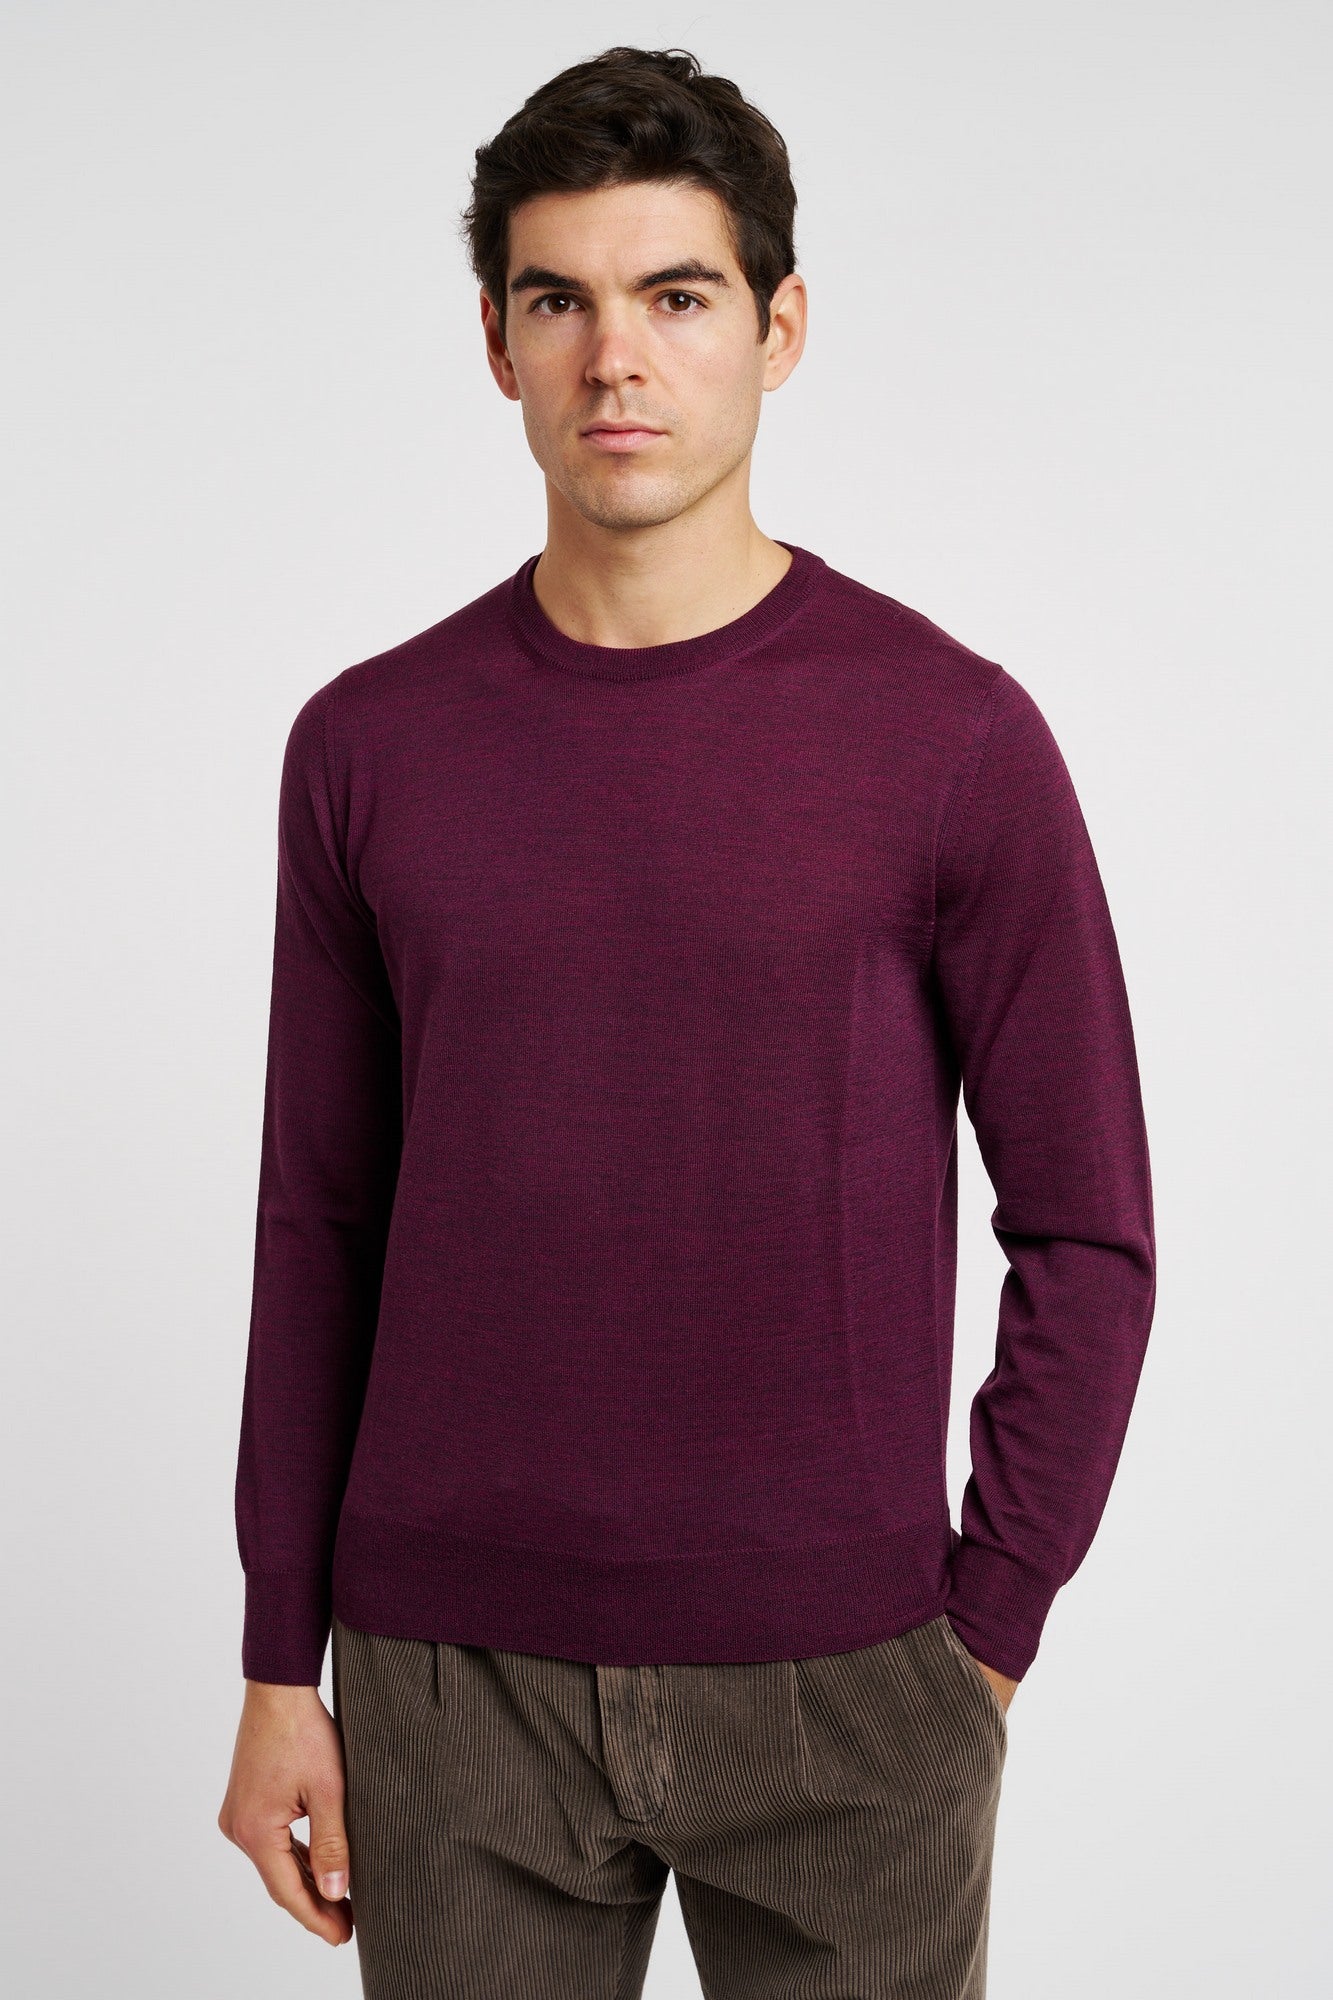 Canali Strickware Bordeaux Wolle-3